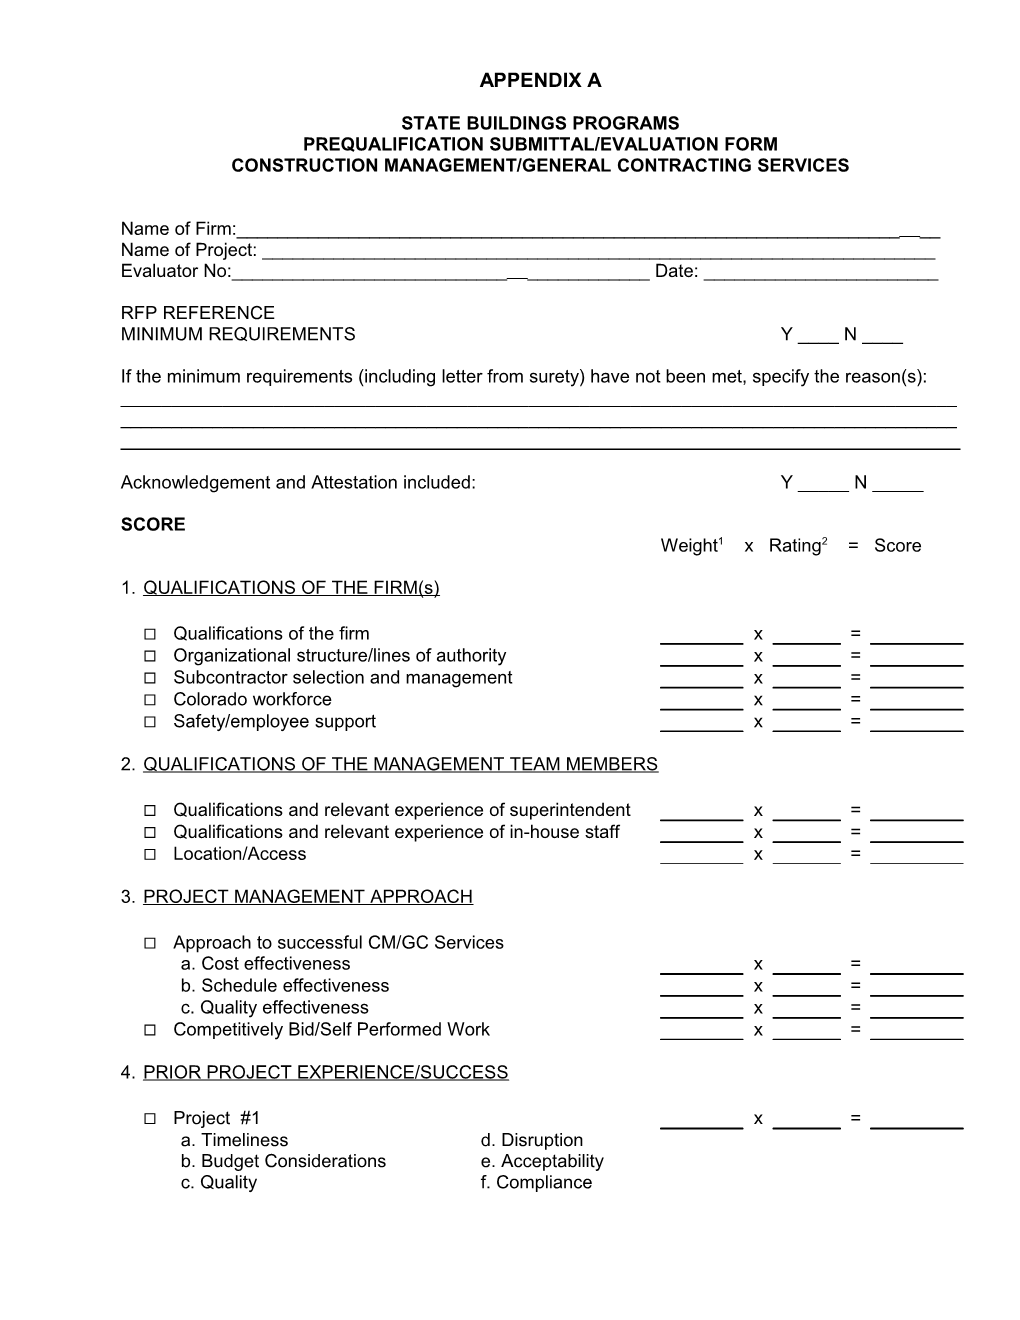 Prequalification Submittal/Evaluation Form